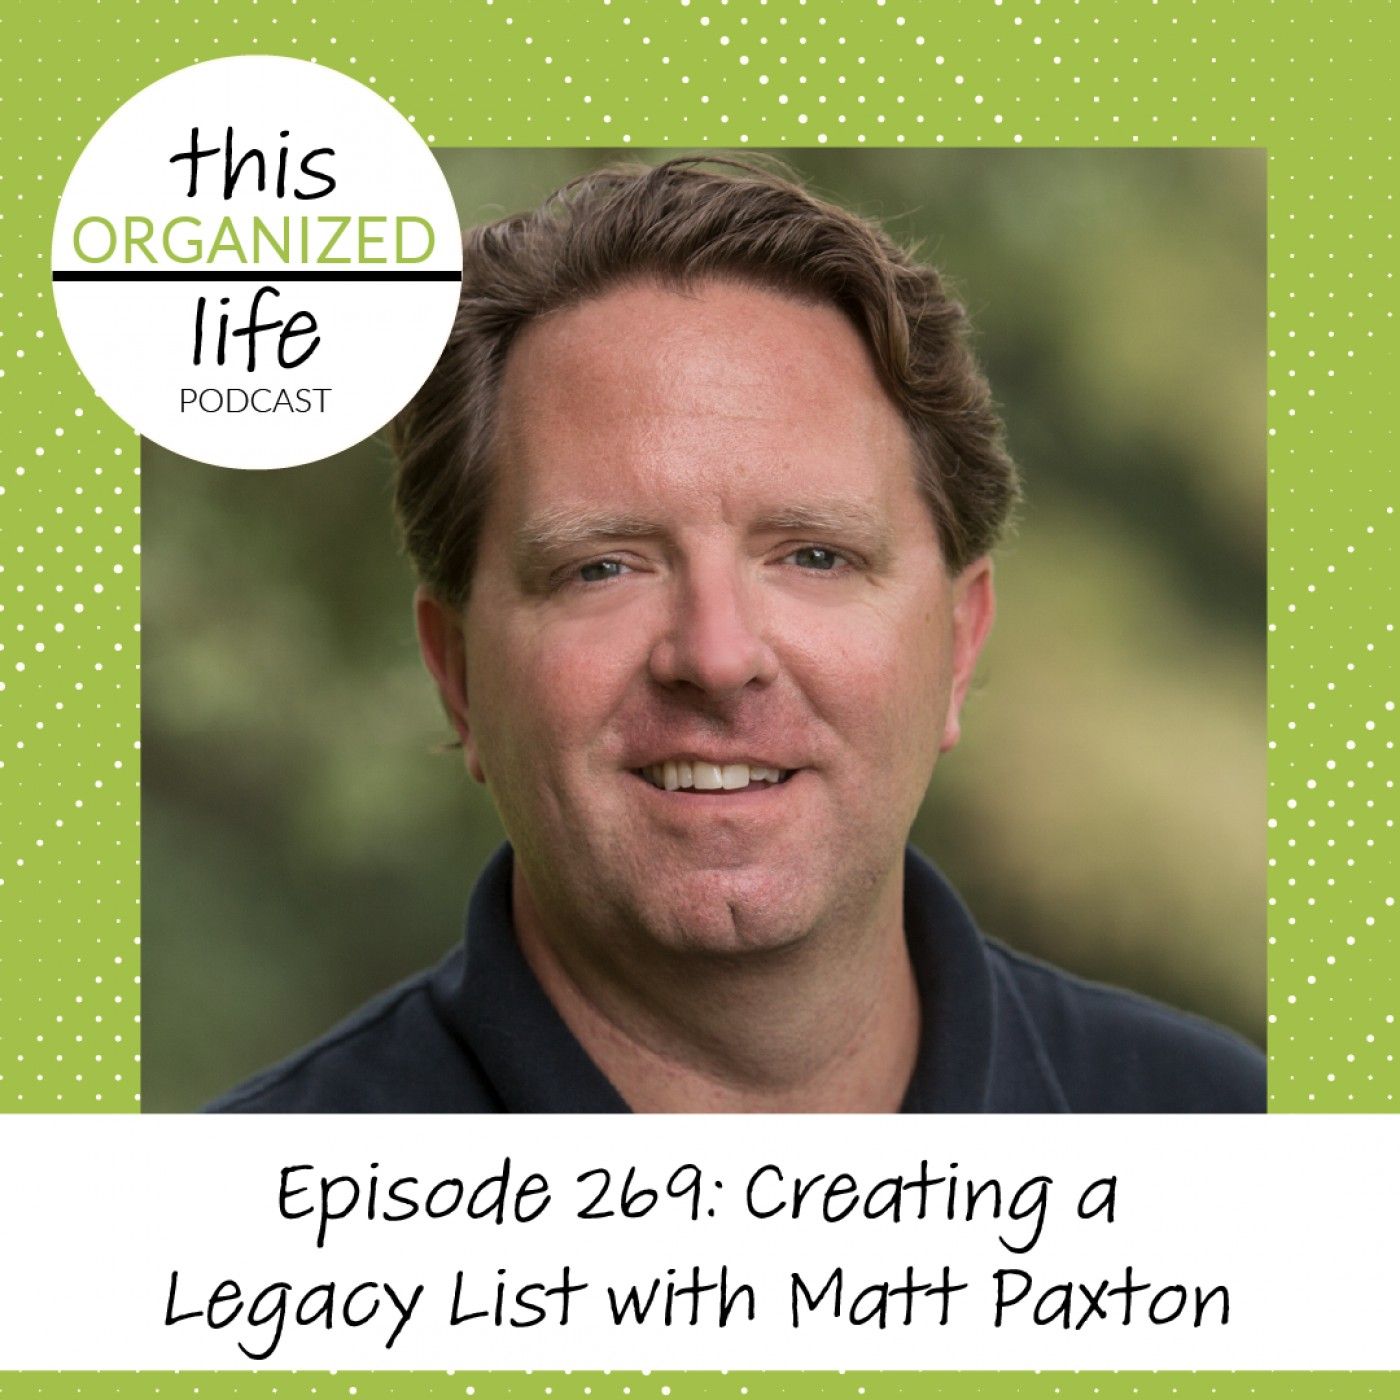 ep 269: Creating a Legacy List with Matt Paxton